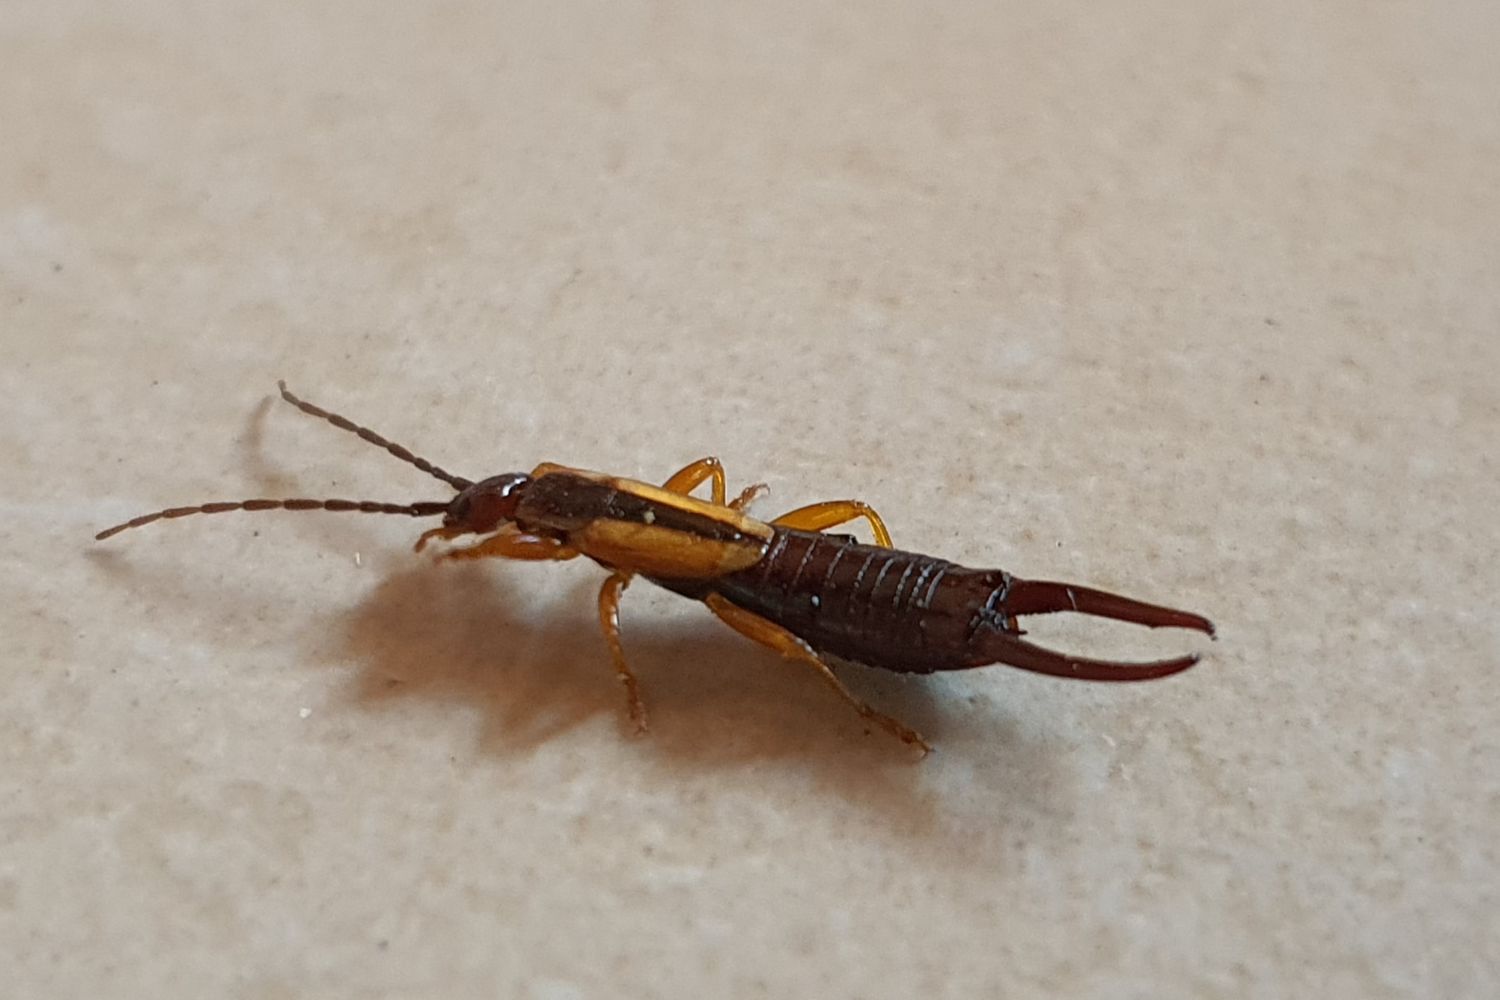 How Do You Get Rid of Earwig?